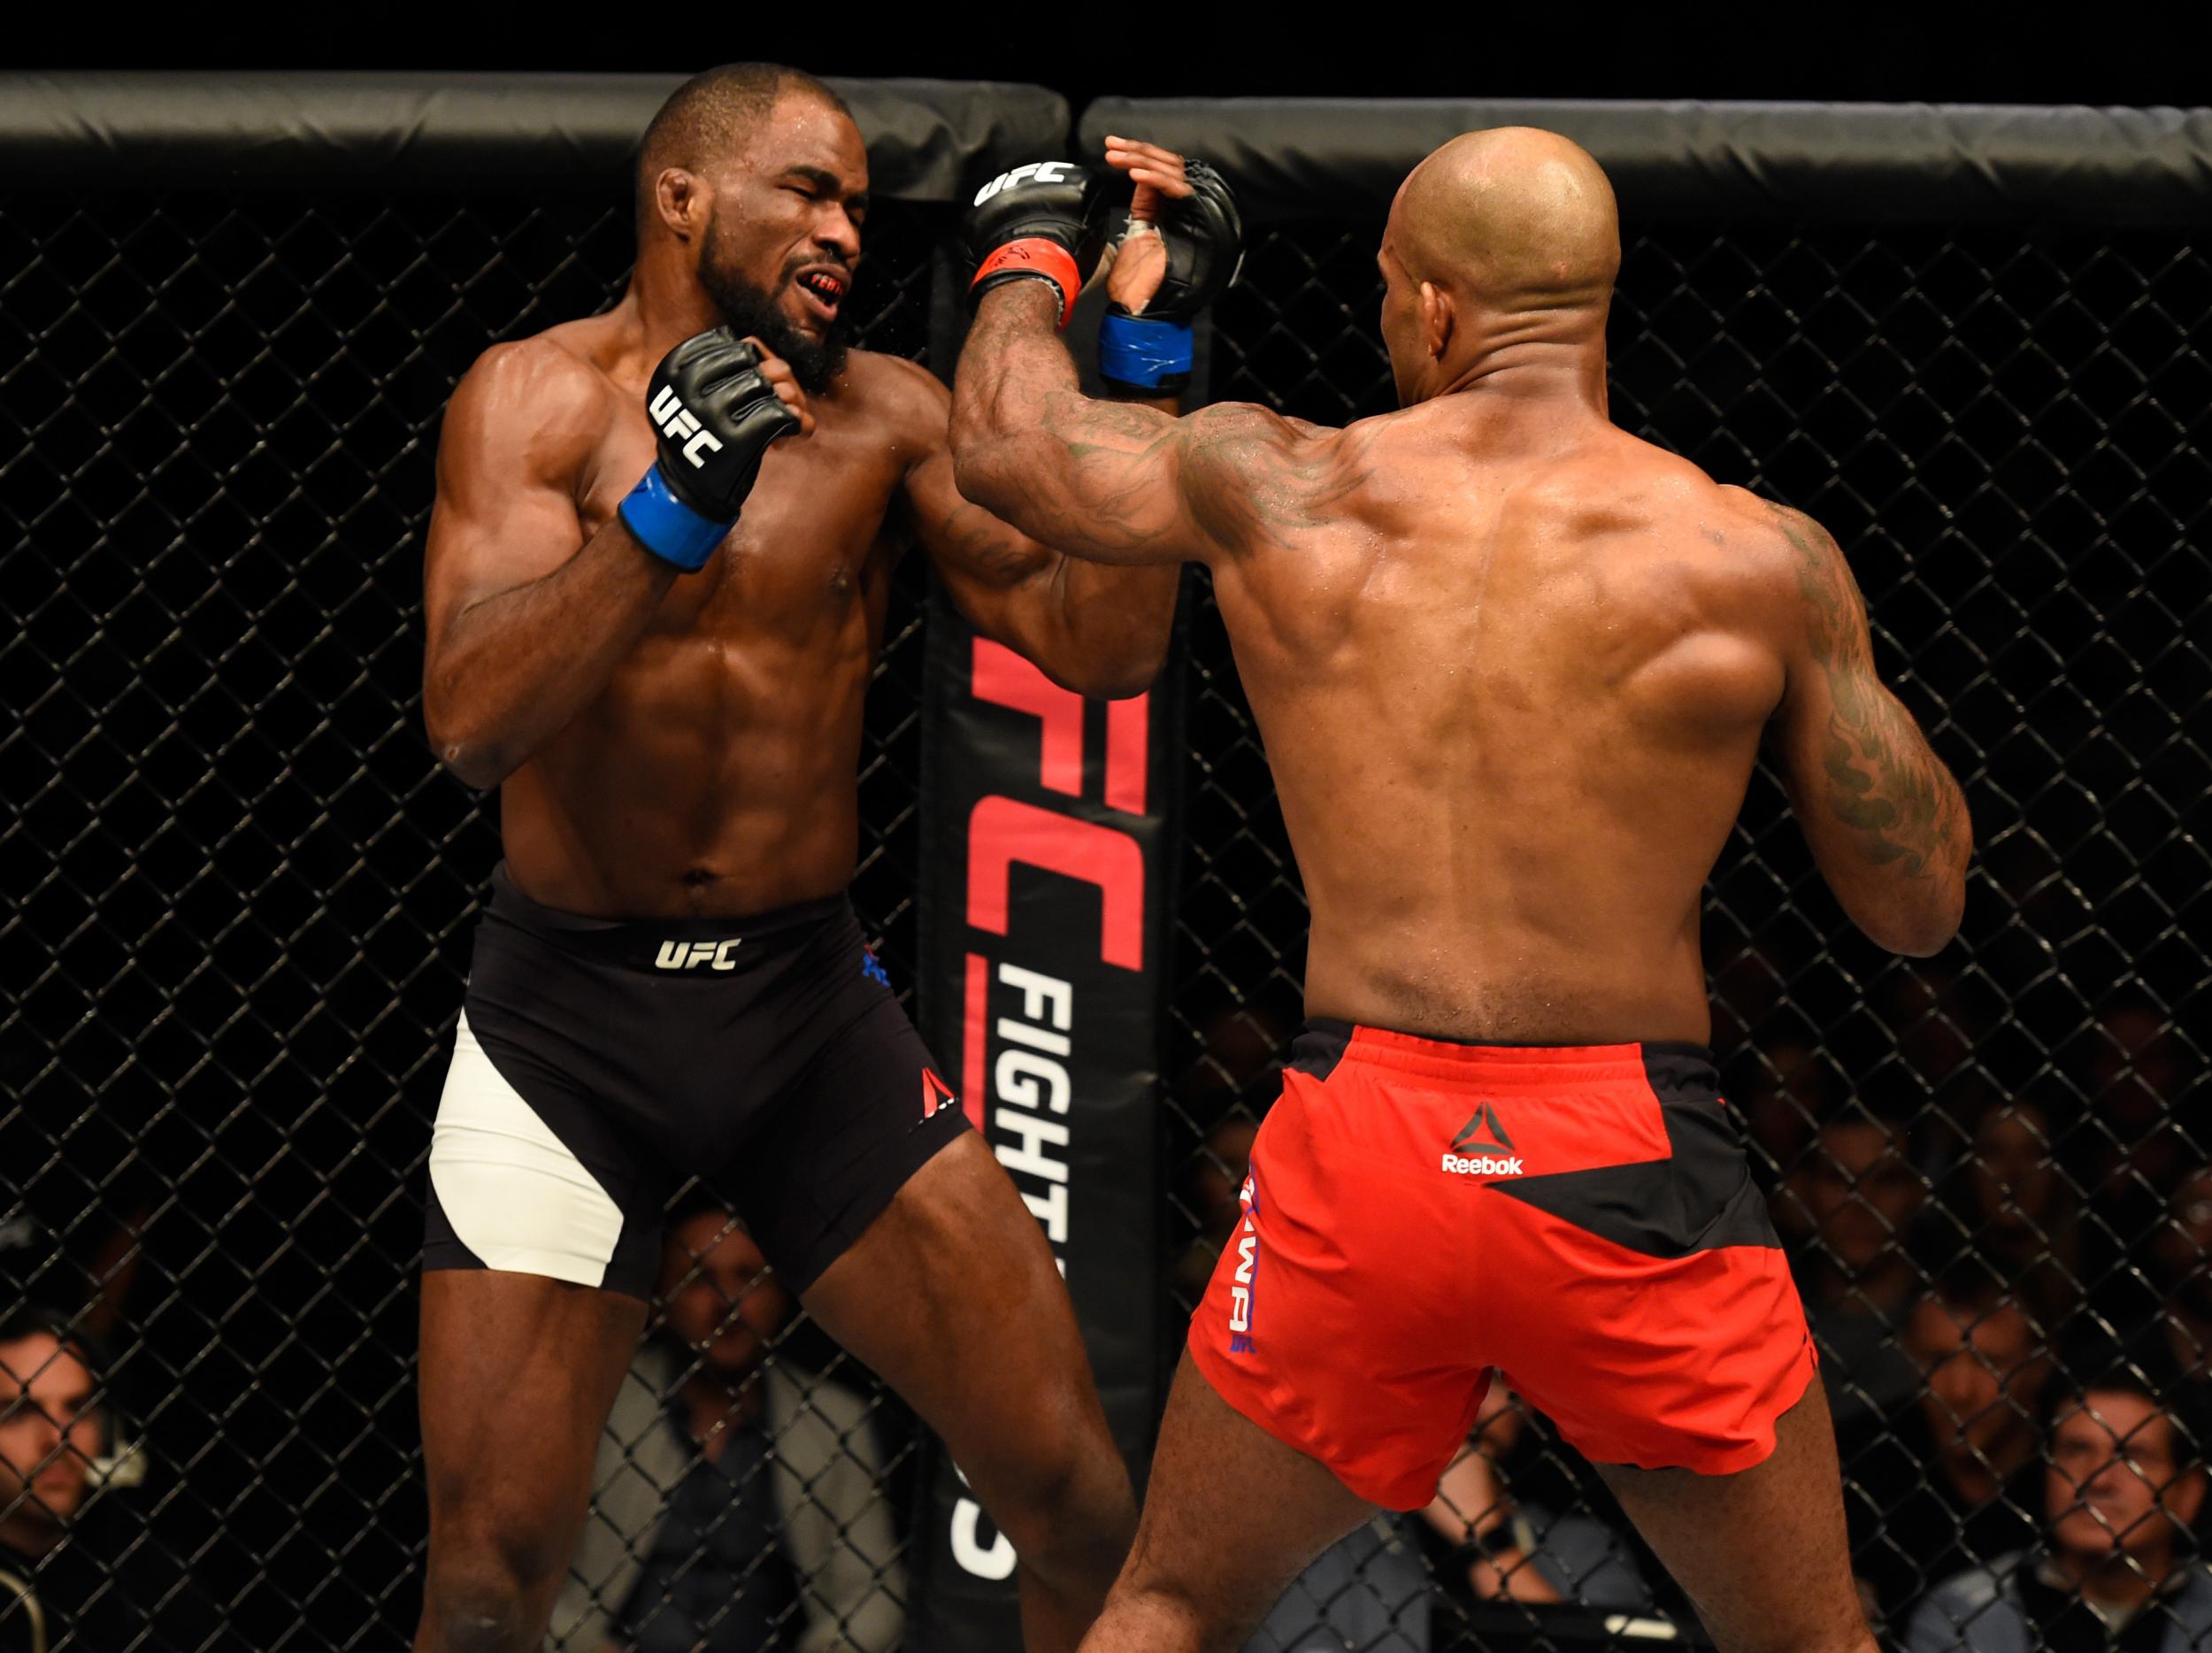 Manuwa made light work of Anderson at the O2